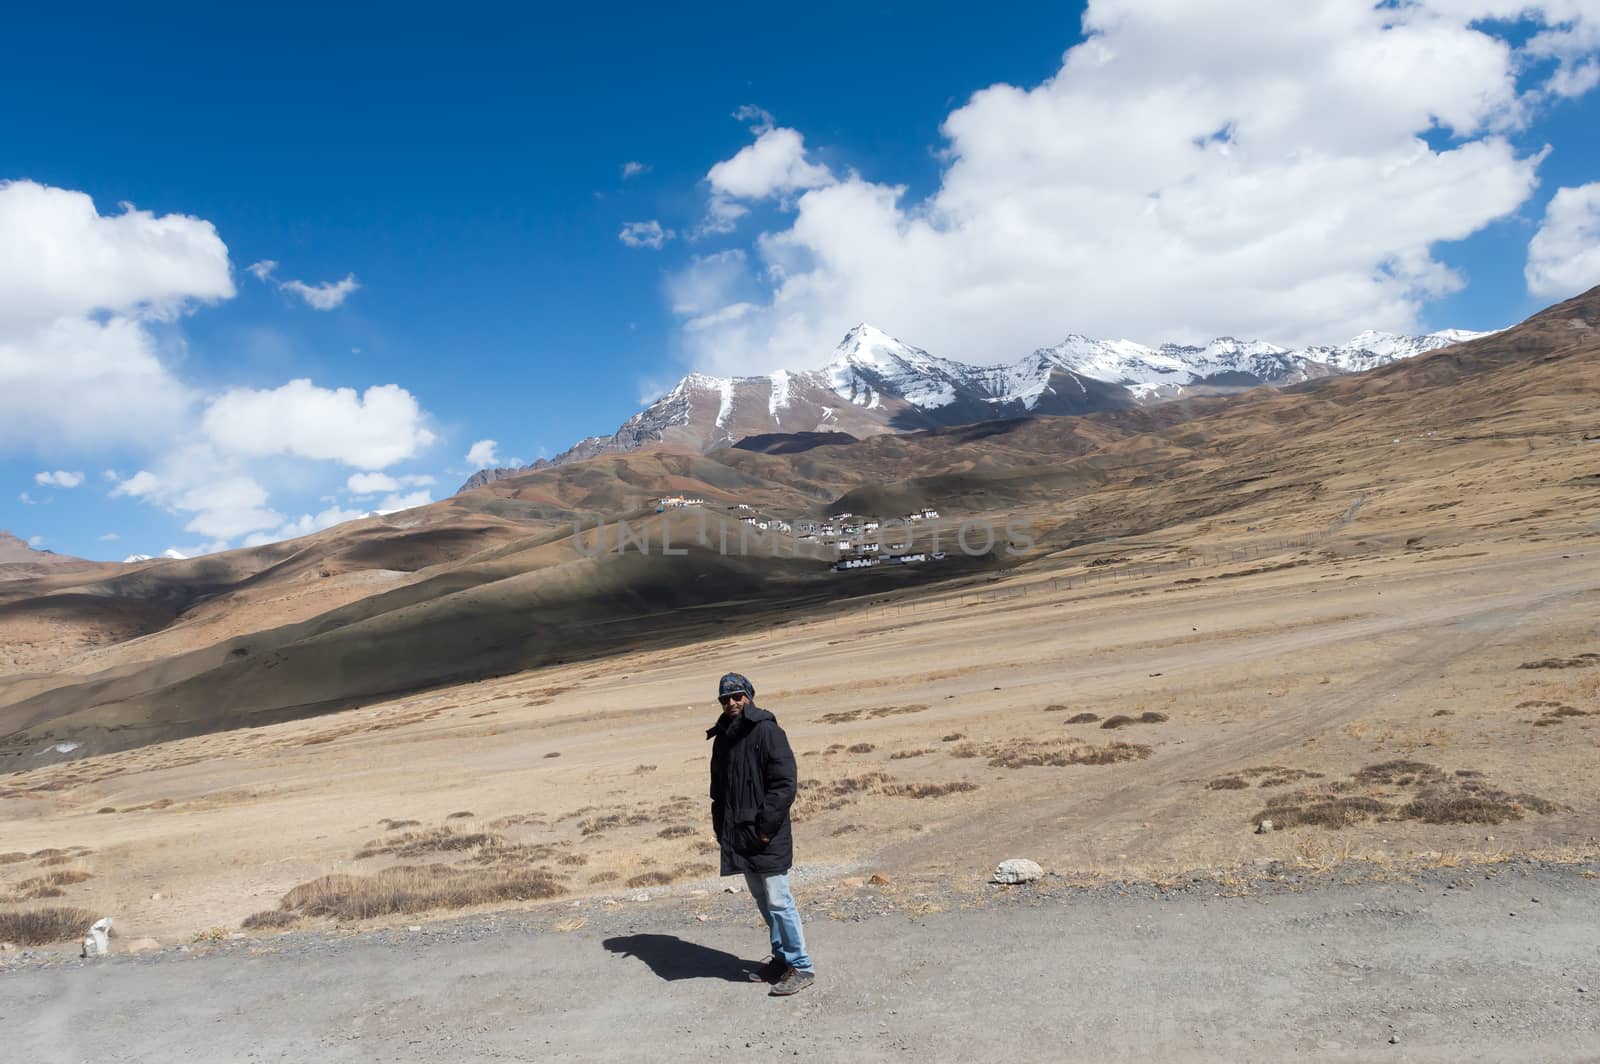 Solo Indian traveler in winter clothing standing alone in a remote mountain road. Snow capped mountain with floating clouds blue sky in the background.